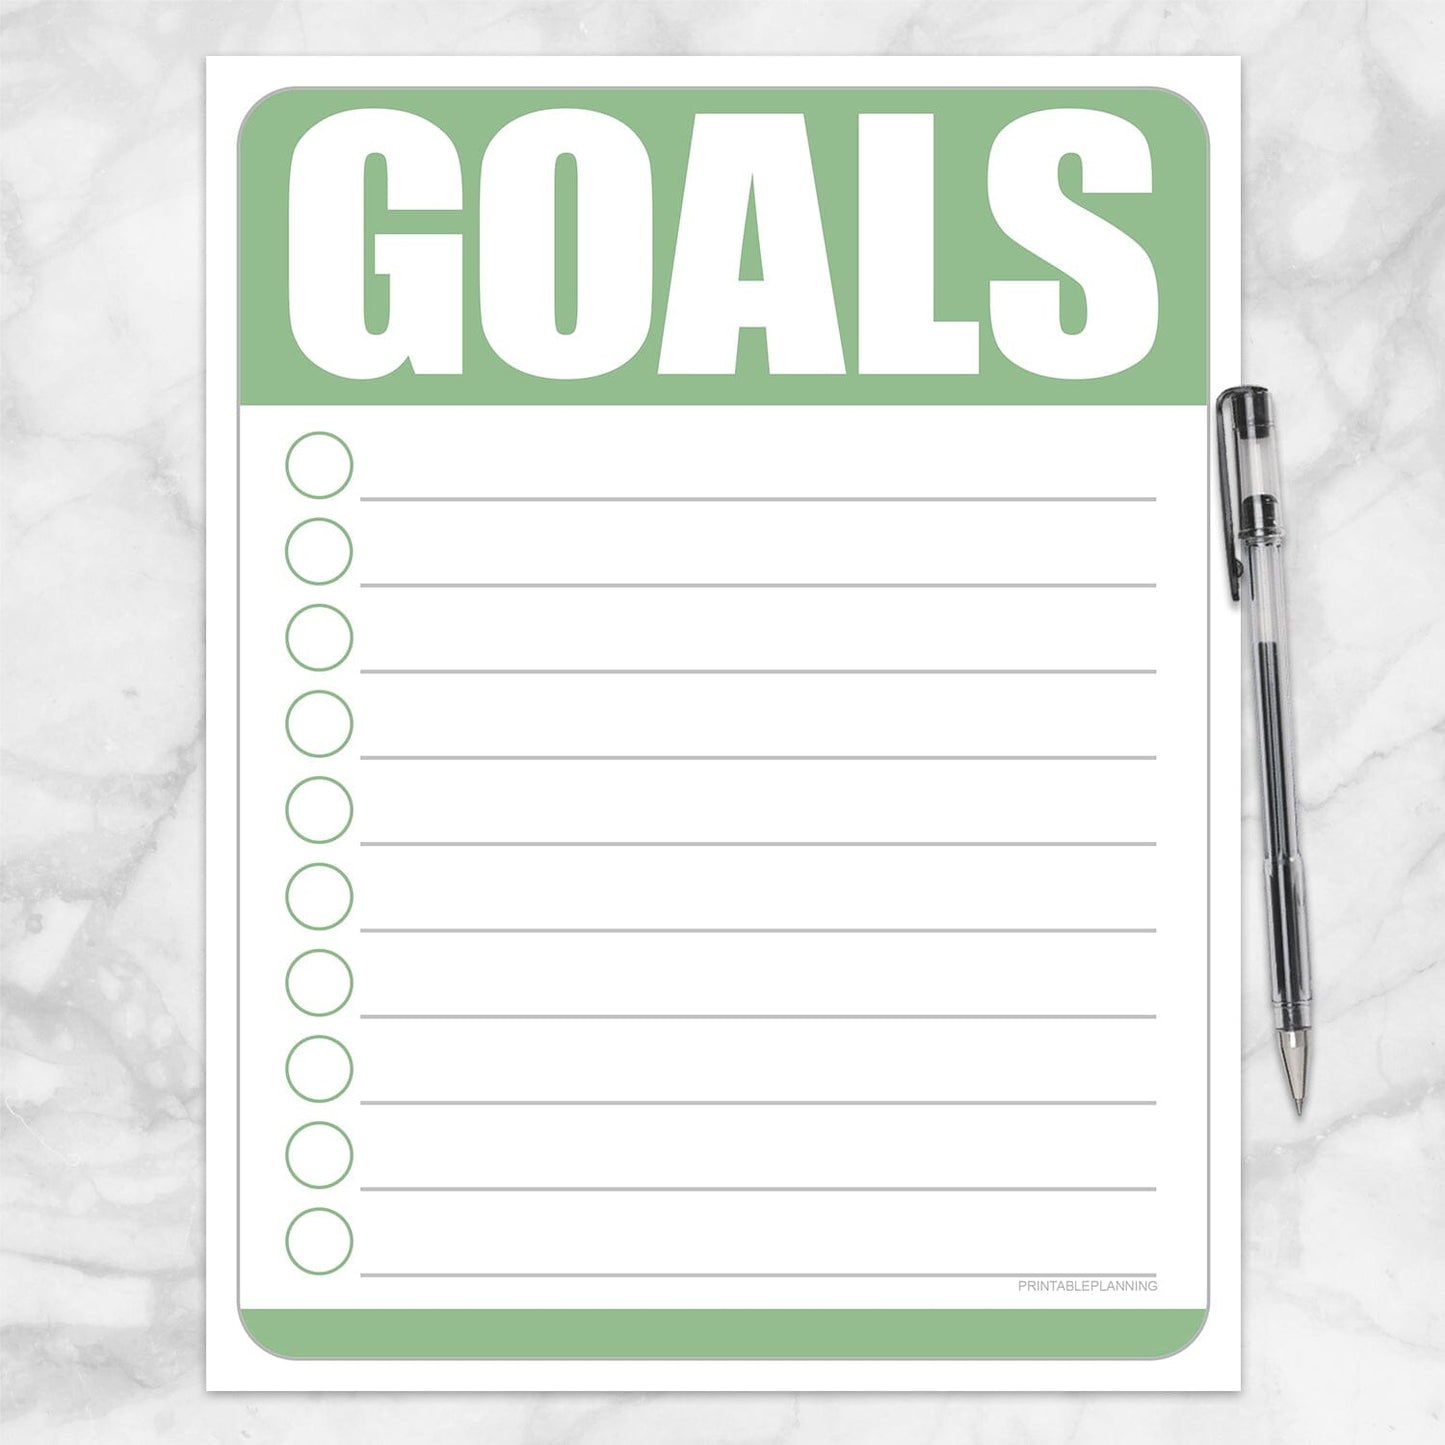 Printable Goals - Green Full Page Checklist at Printable Planning.